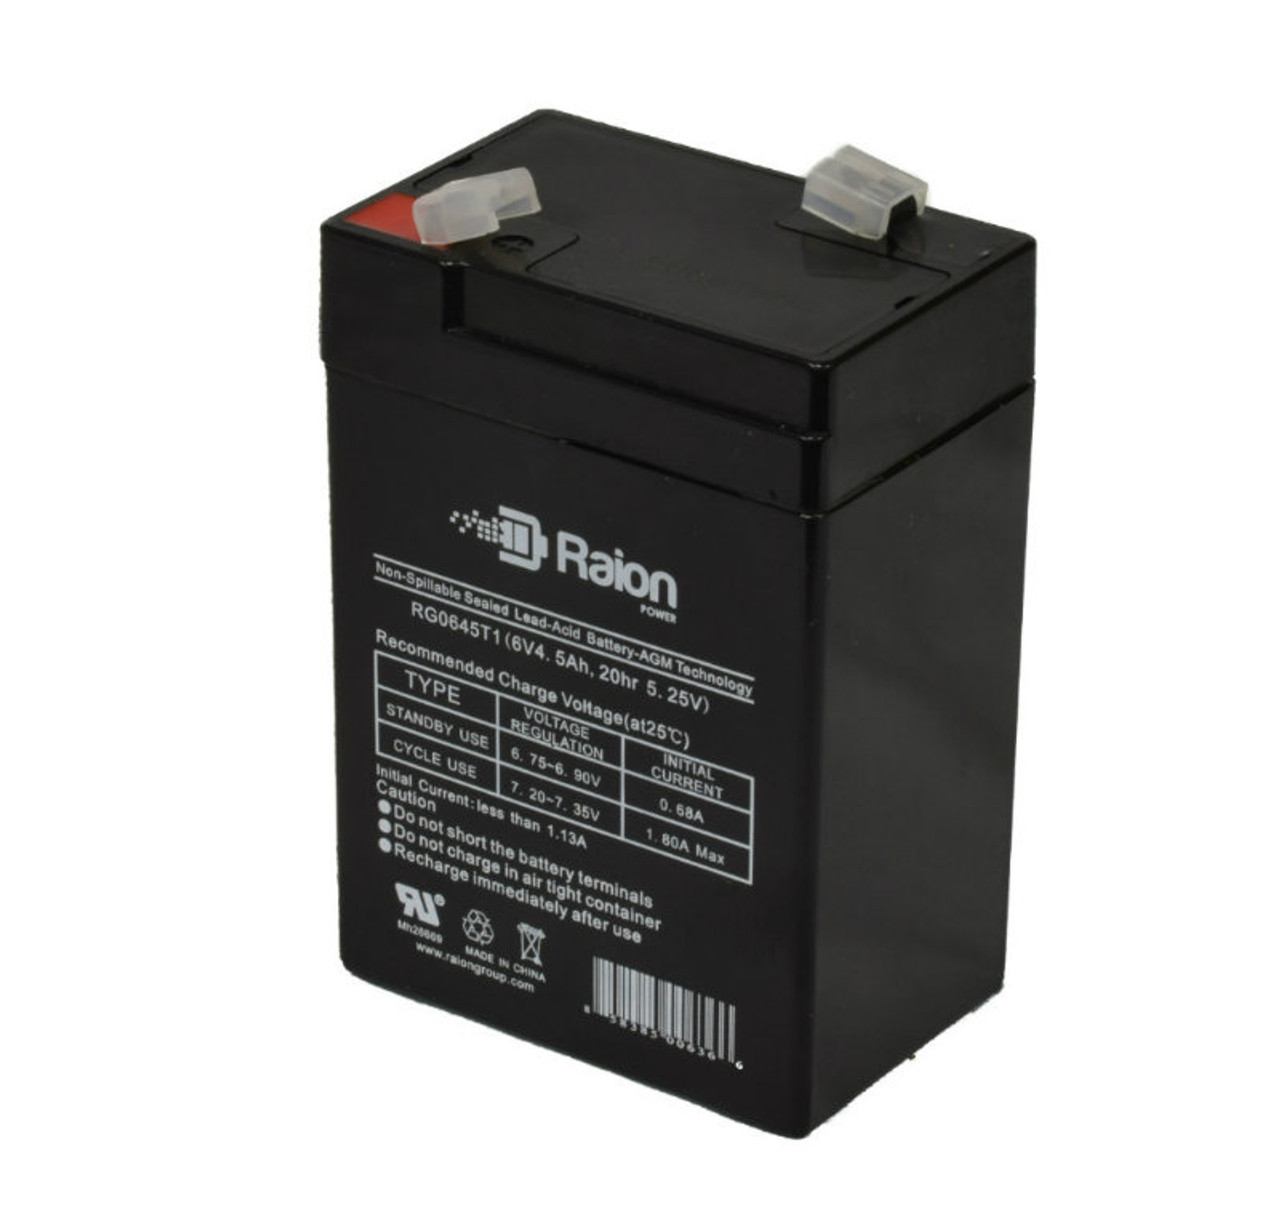 Raion Power RG0645T1 6V 4.5Ah Replacement Battery Cartridge for Sure-way 1003